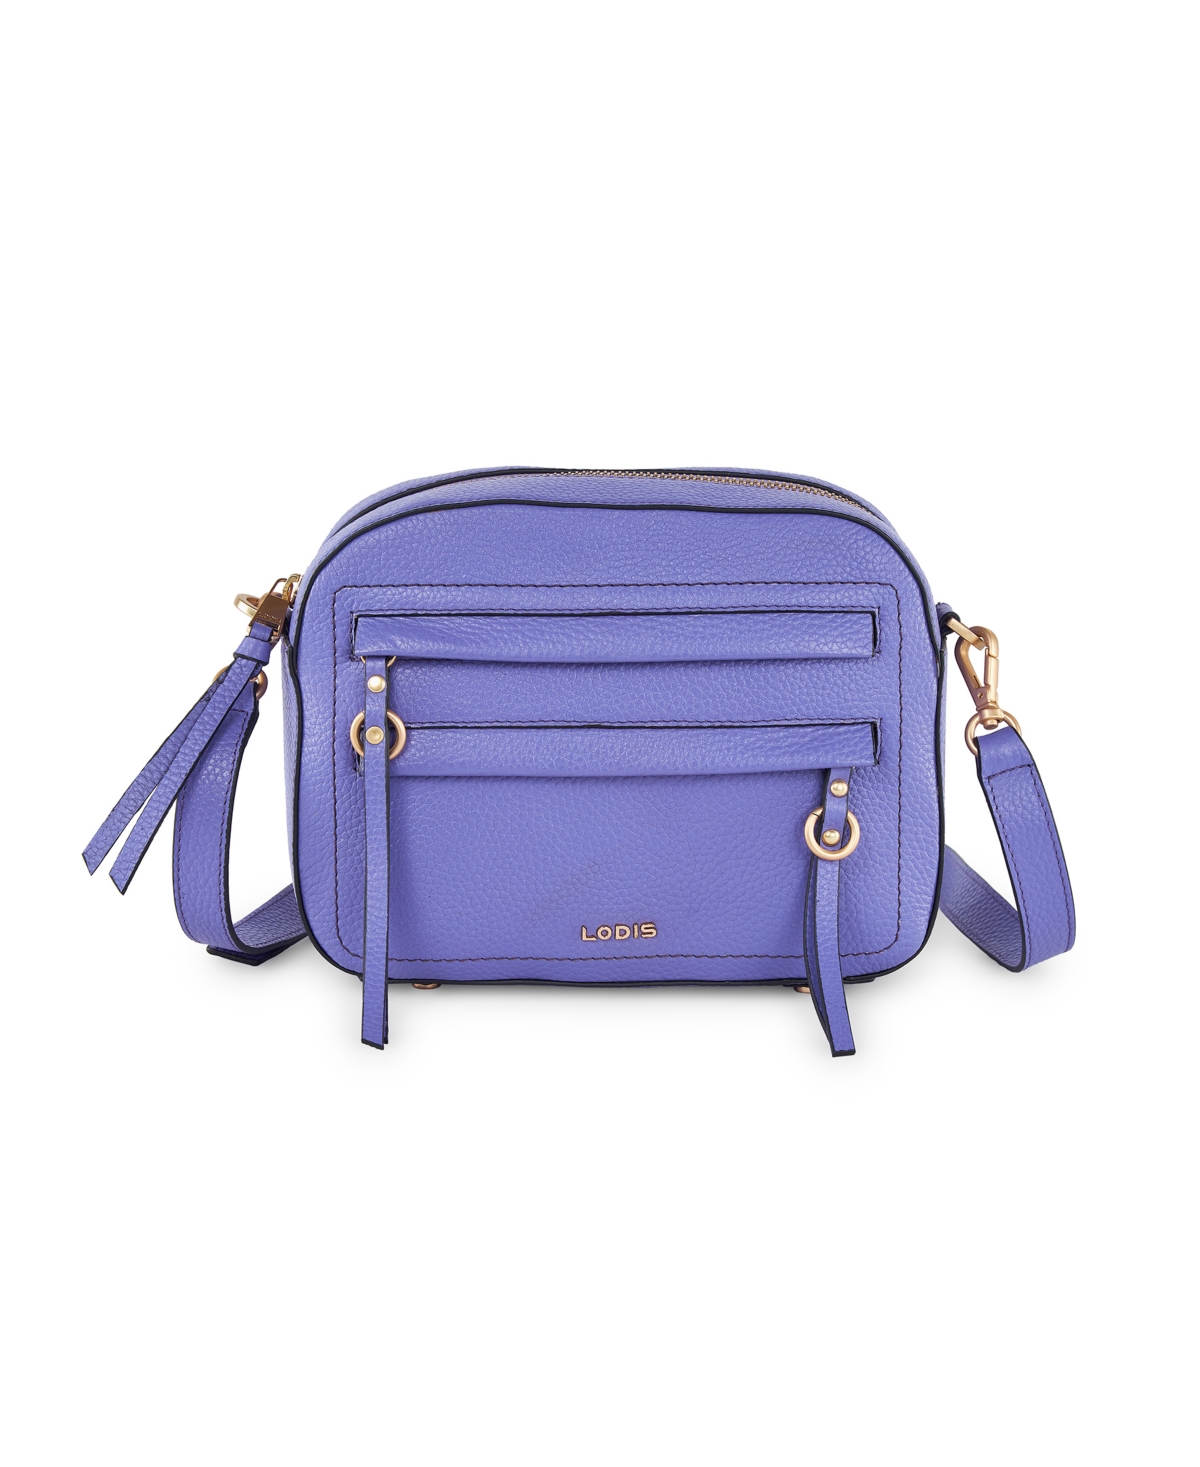 Women's Abby Camera Bag - Periwinkle